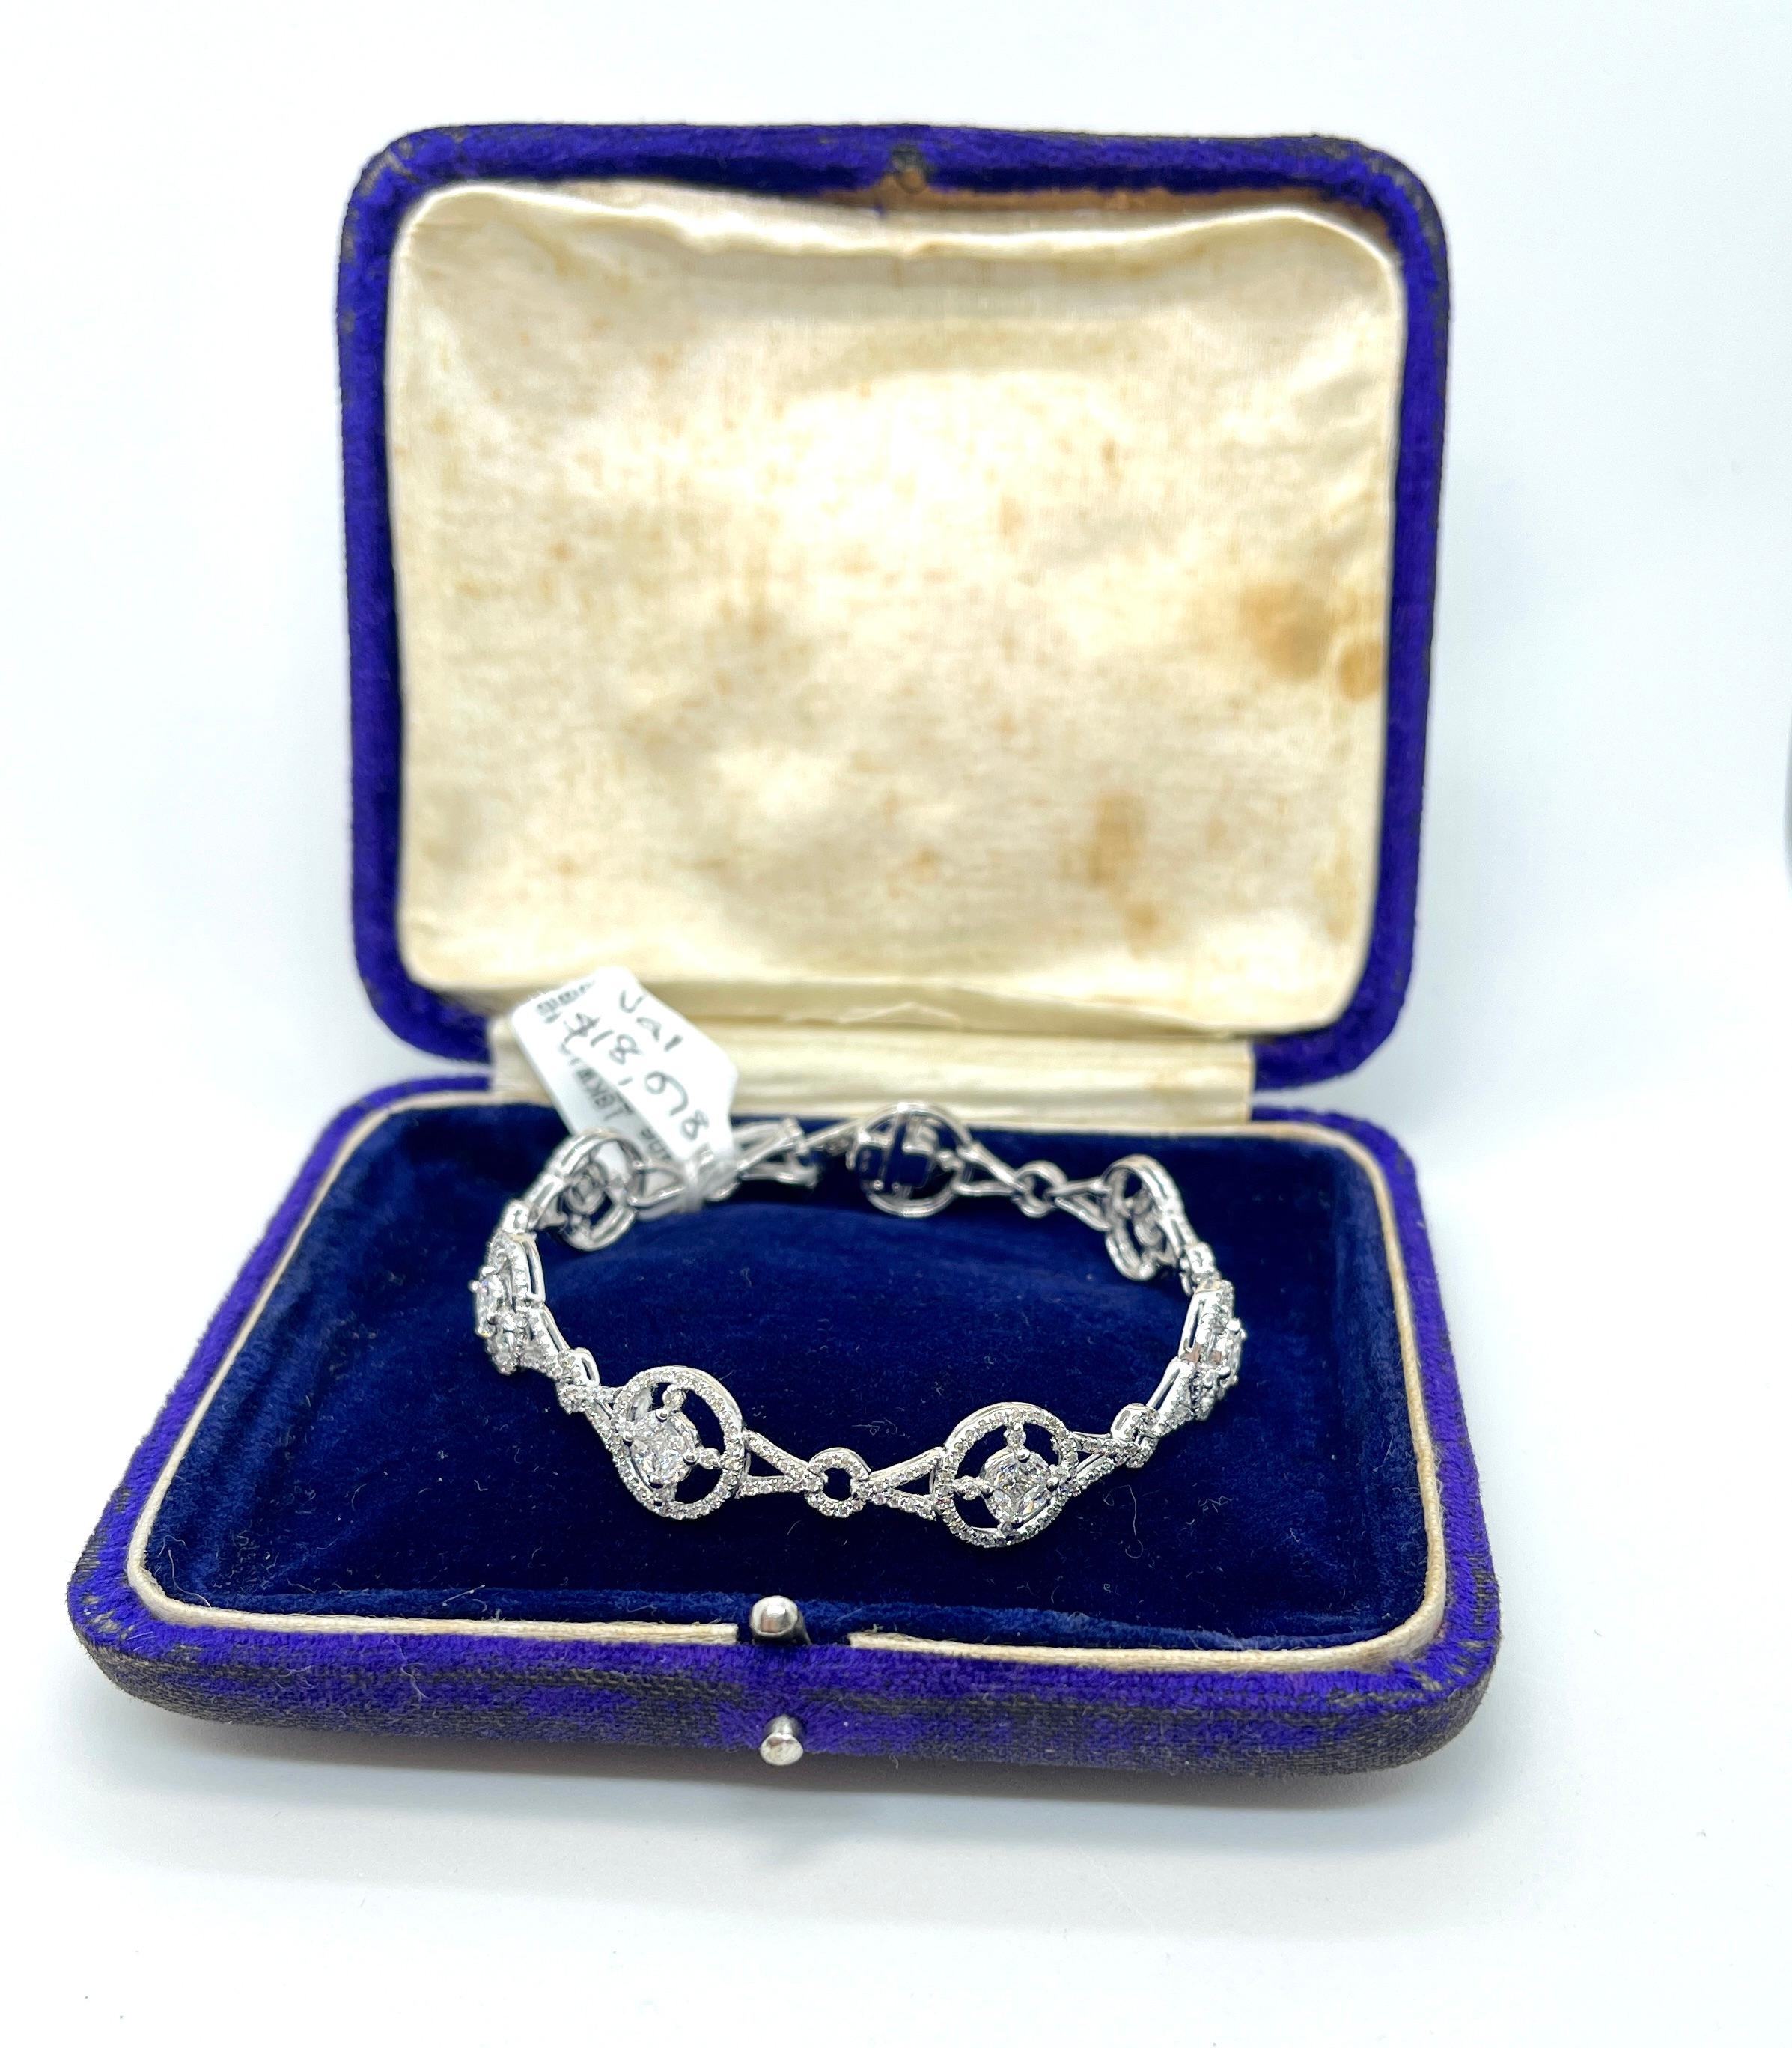 Very Sparkly Diamonds on offer here!

This stylish bracelet features a combination of vari-cut sparkly white Diamonds set in 18ct white gold. It’s a pretty piece that consists of circular flower clusters joined by flexible links and is comfortable